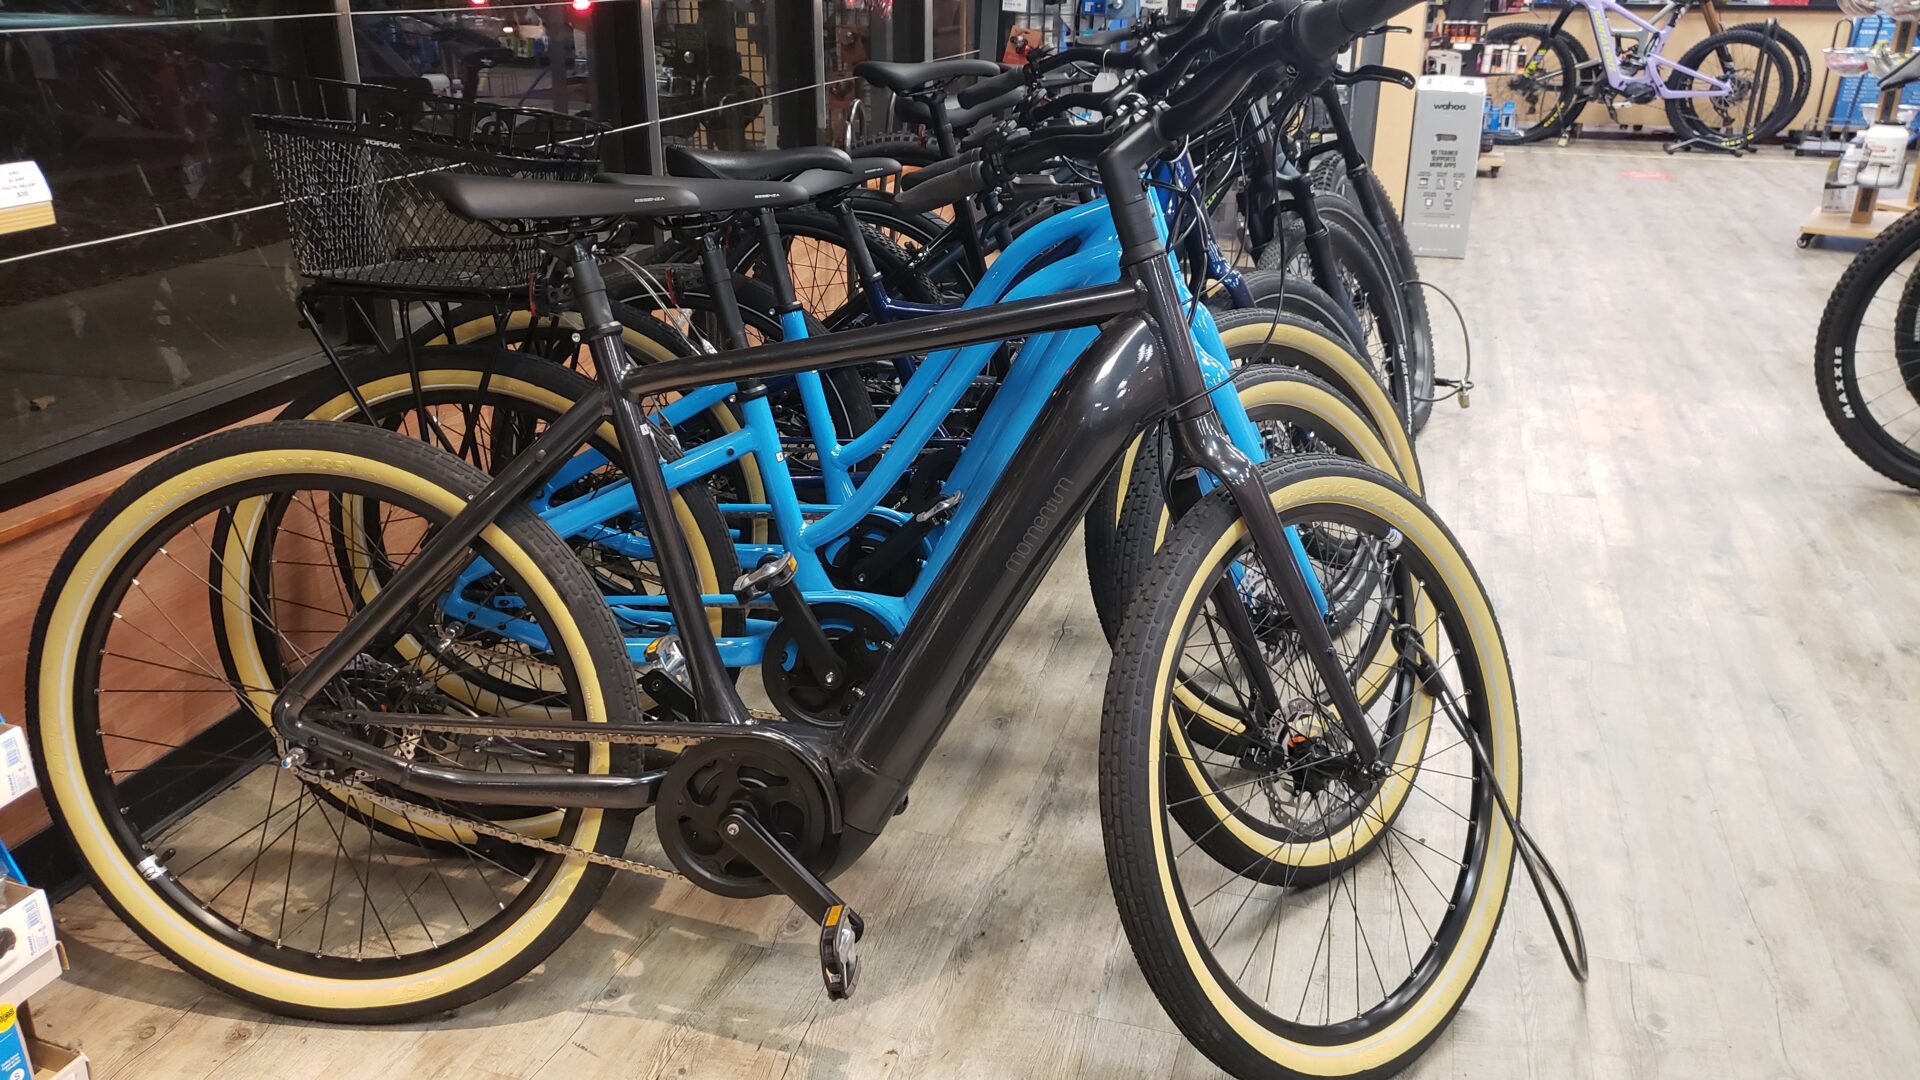 A collection of quality bikes at a store